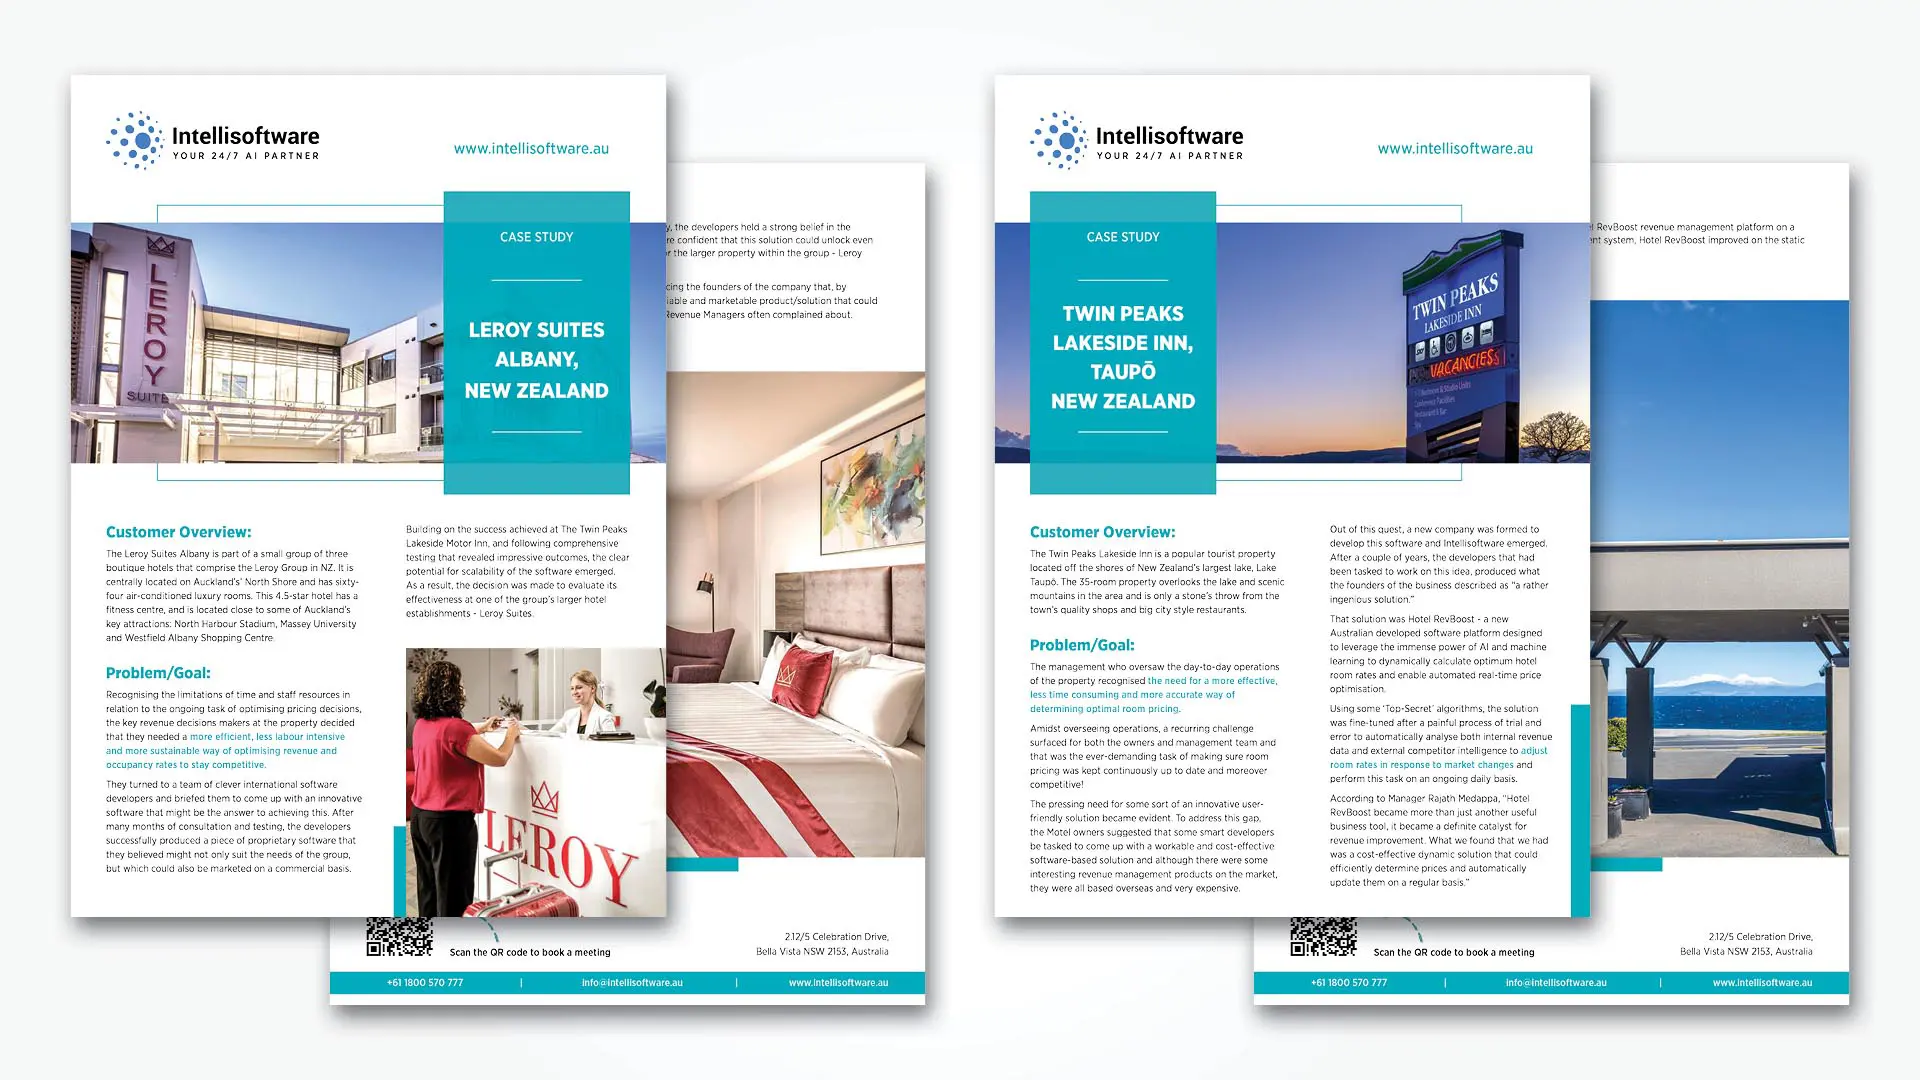 Intellisoftware case study by think creative agency